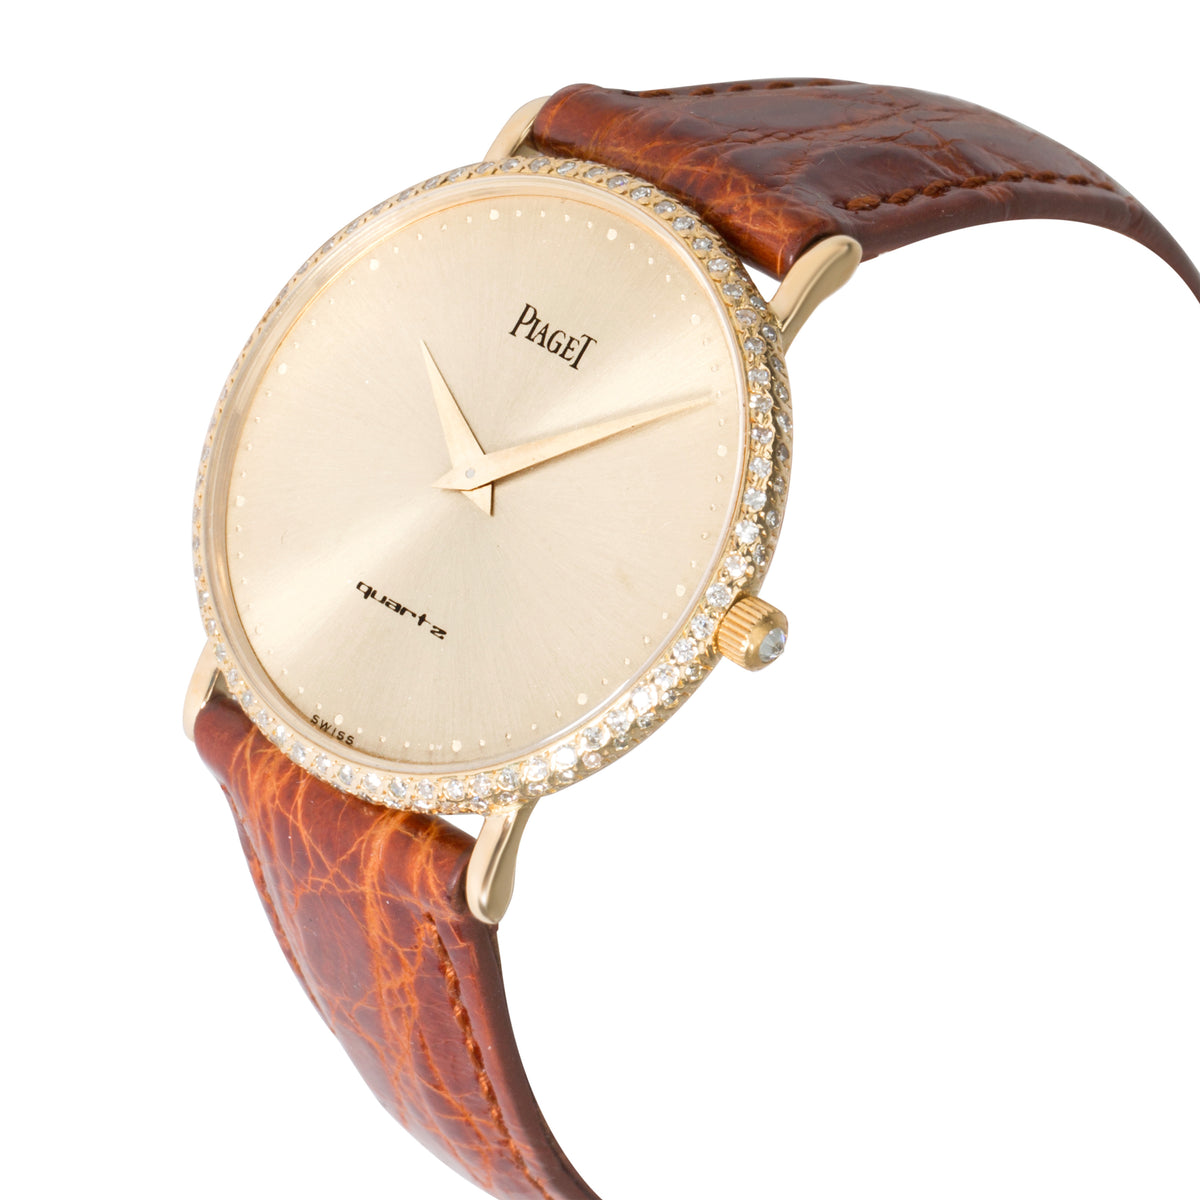 Piaget Classique 9027 Unisex Watch in 18kt Yellow Gold